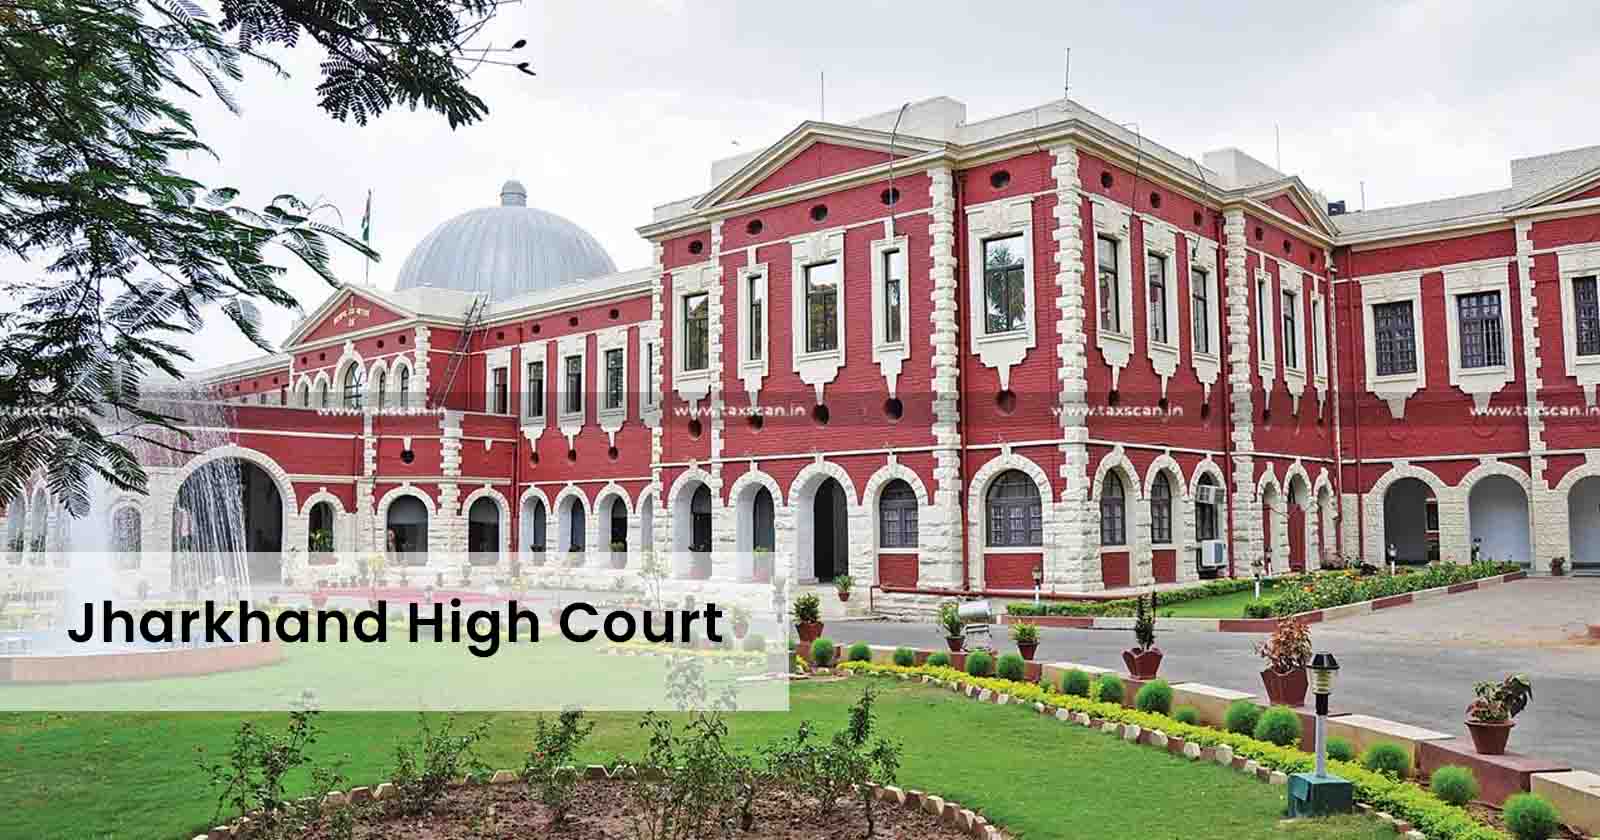 jharkhand hc - jharkhand high court - Excise duty assessment - Excisable goods assessment process - Jurisdiction of Supreme Court in excise matters - taxscan